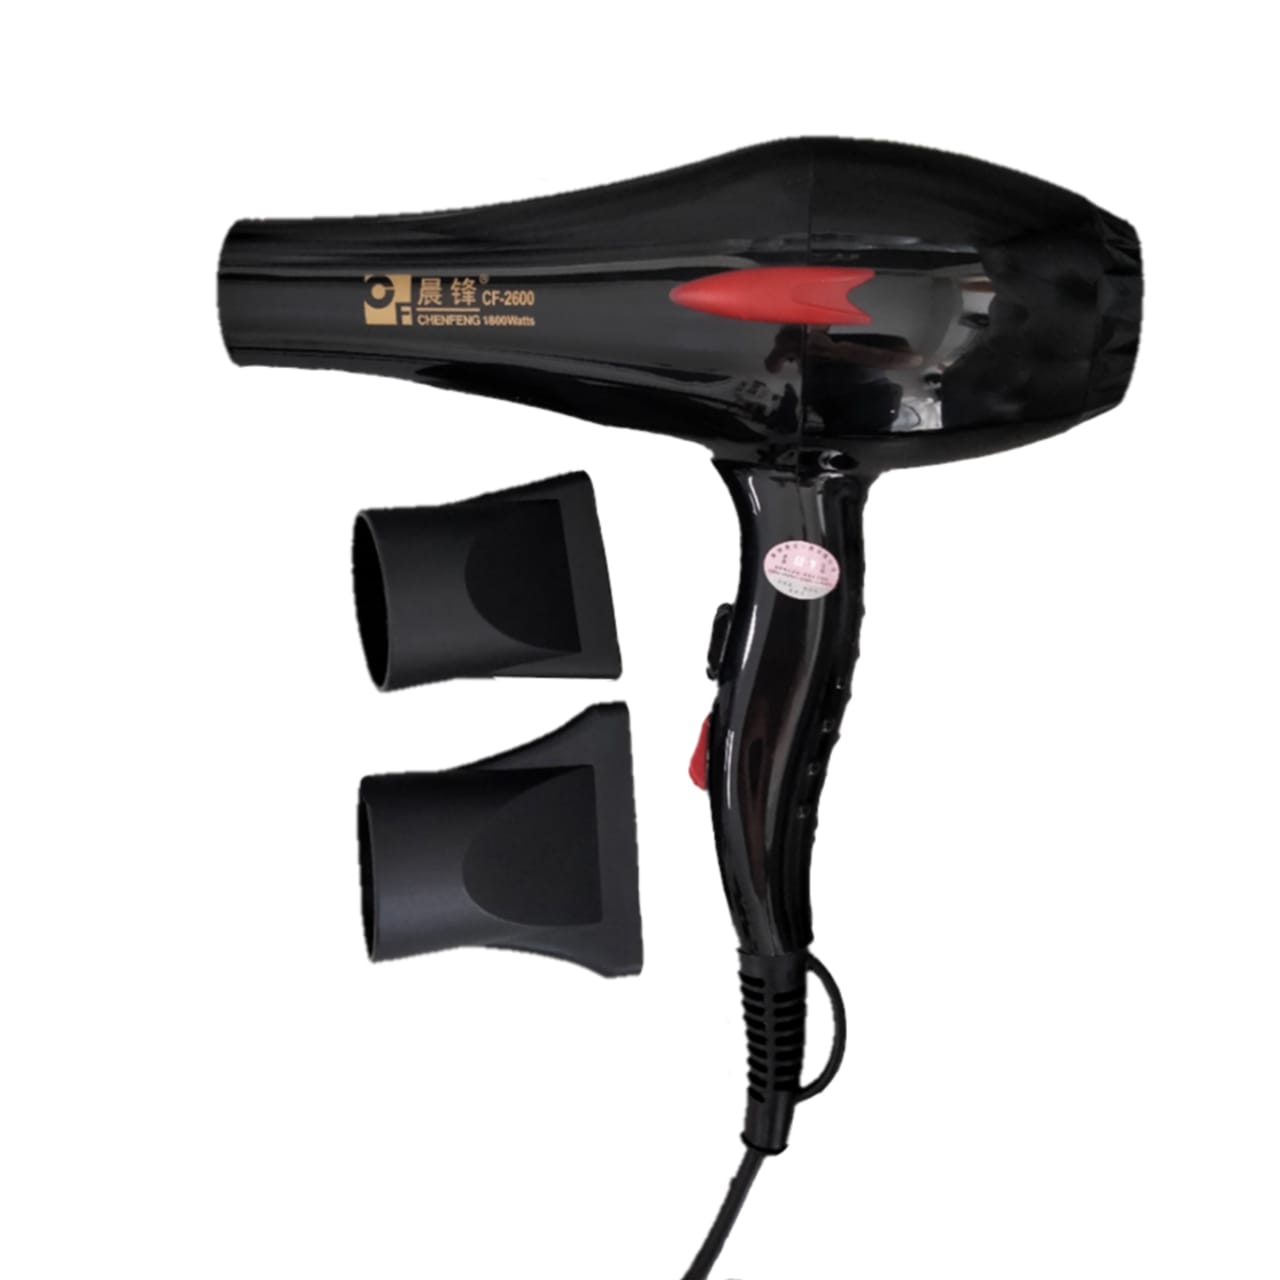 Hair dryer Chenfeng